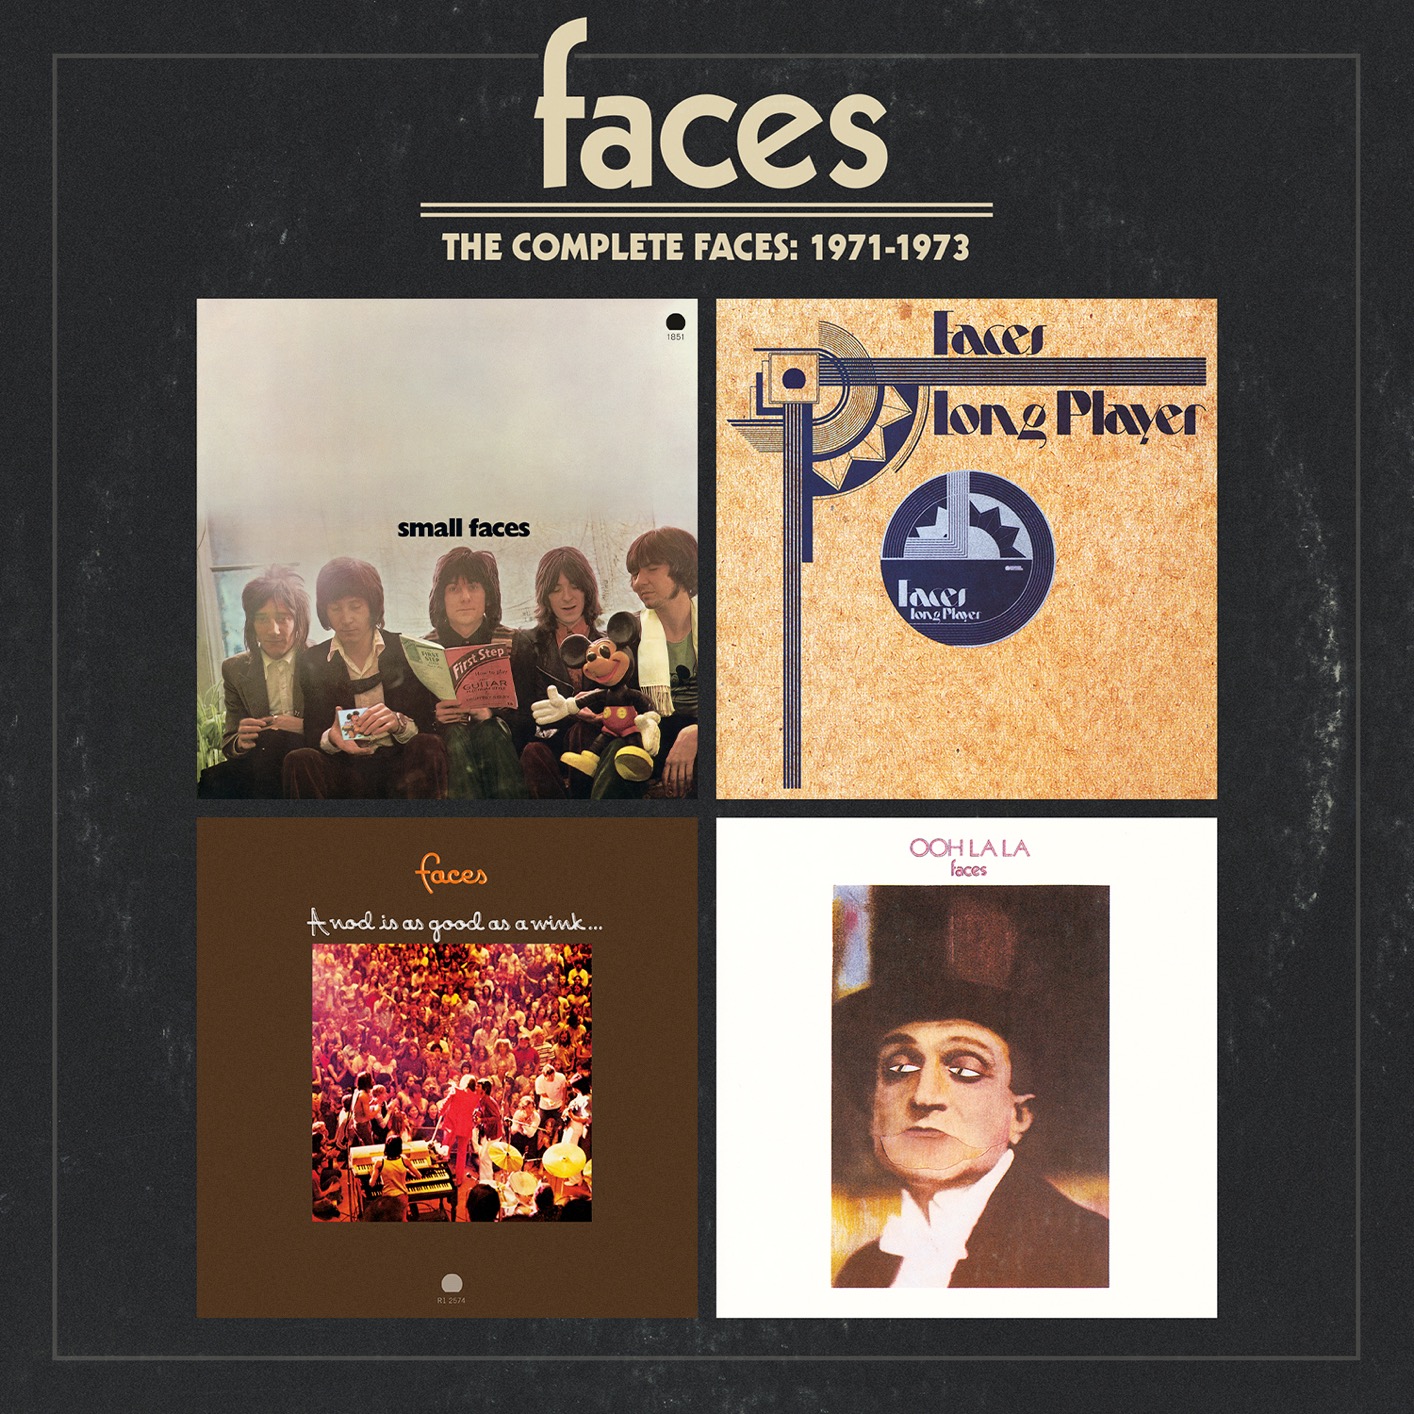 Faces - The Complete Faces: 1971-1973 (Remastered) (2014/2019) [FLAC 24bit/192kHz]